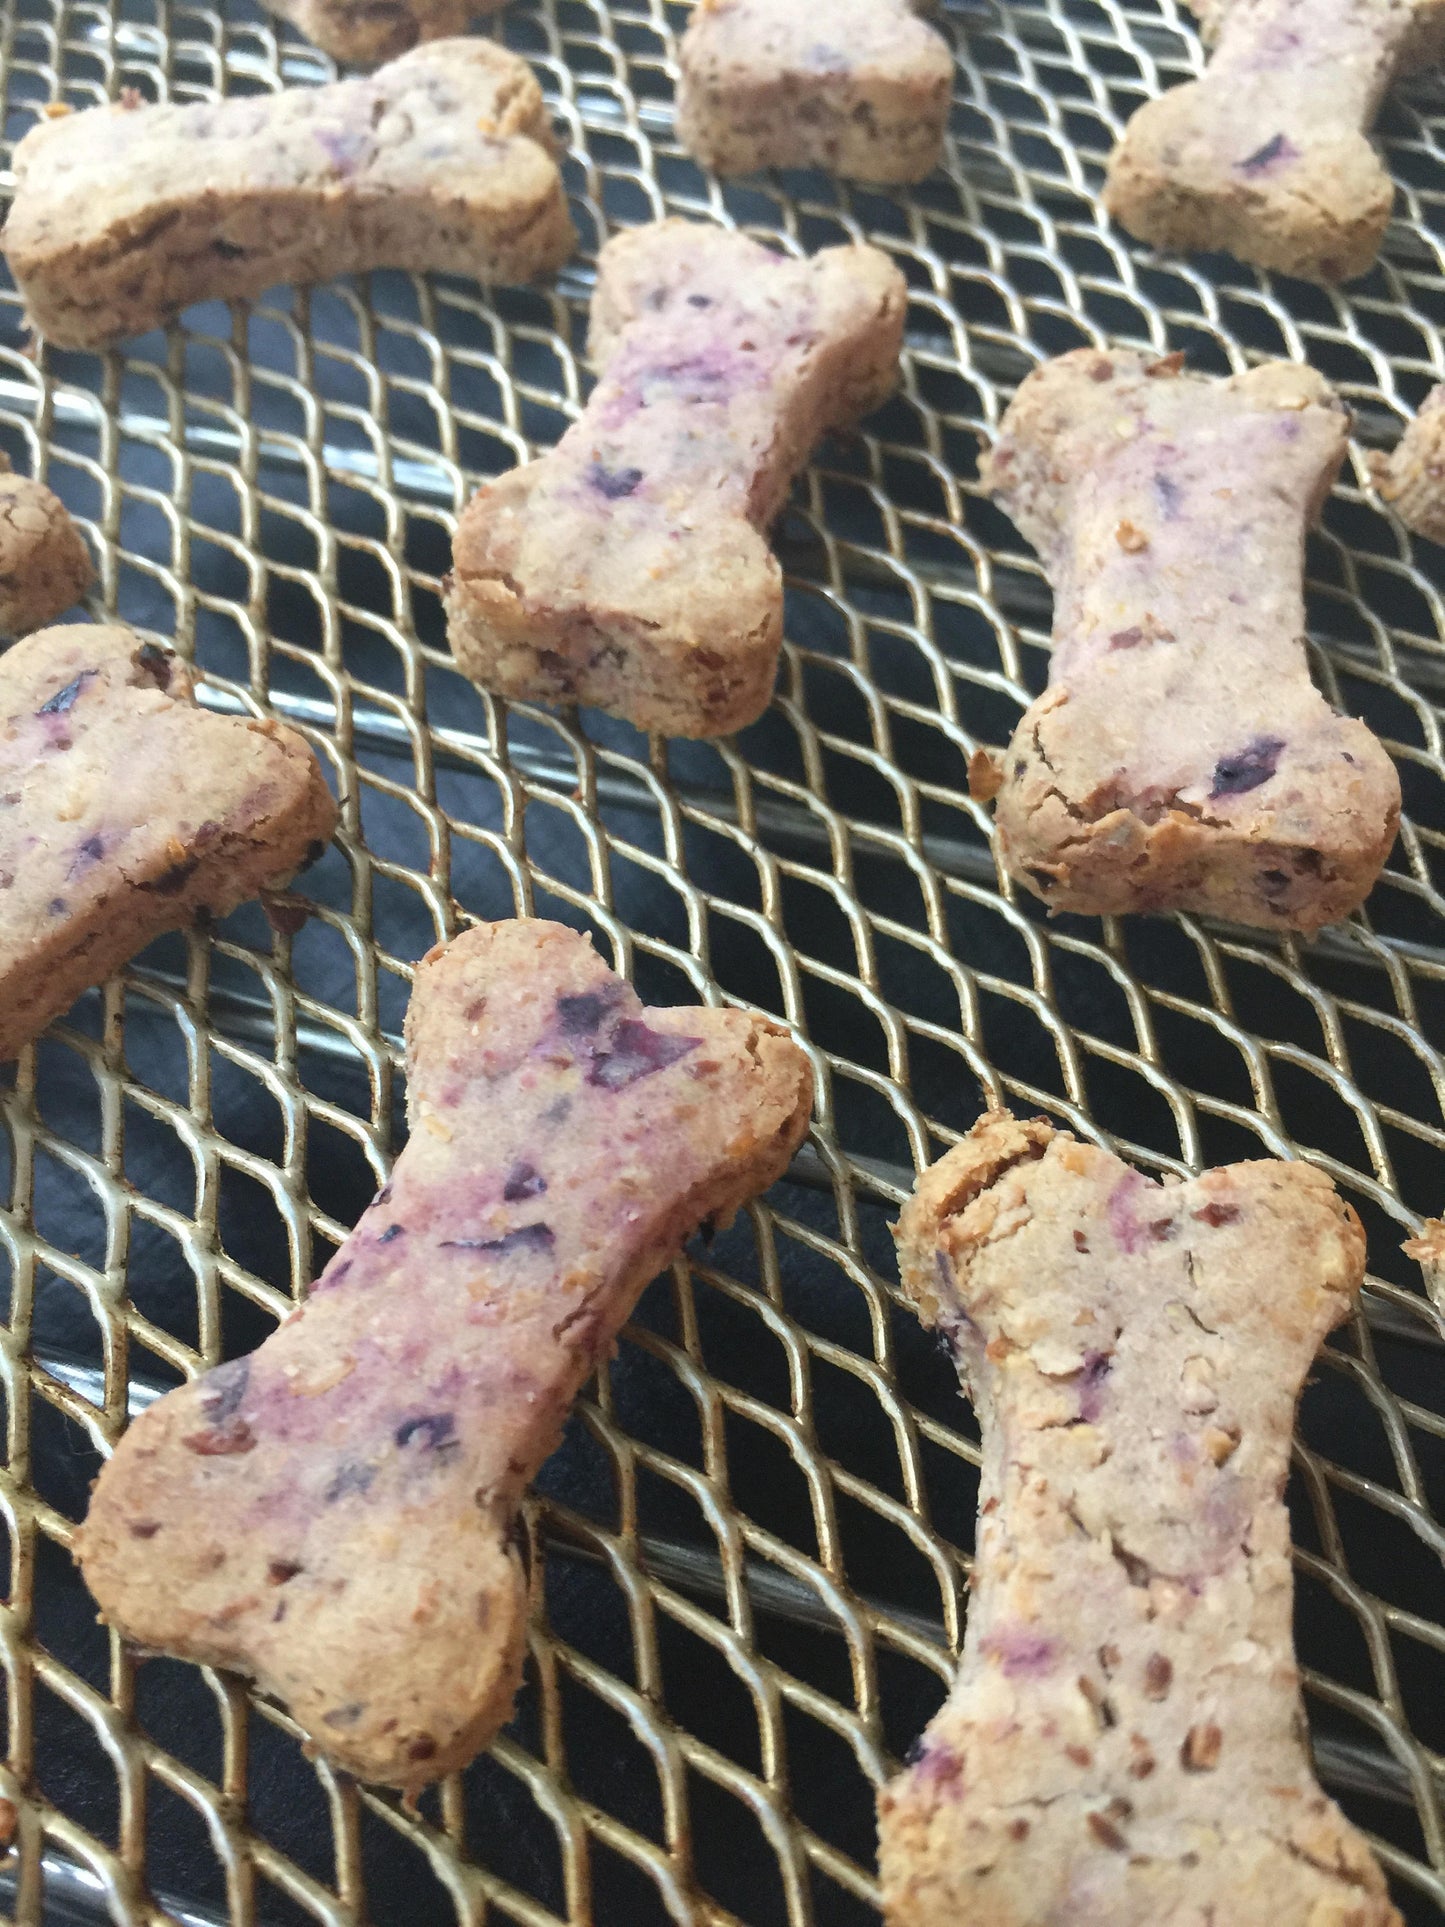 BLUE BERRY YOGURT Dog Treats - Homemade Limited Ingredient Natural Wheat Free A Portion of Proceeds Go To Pet Rescue